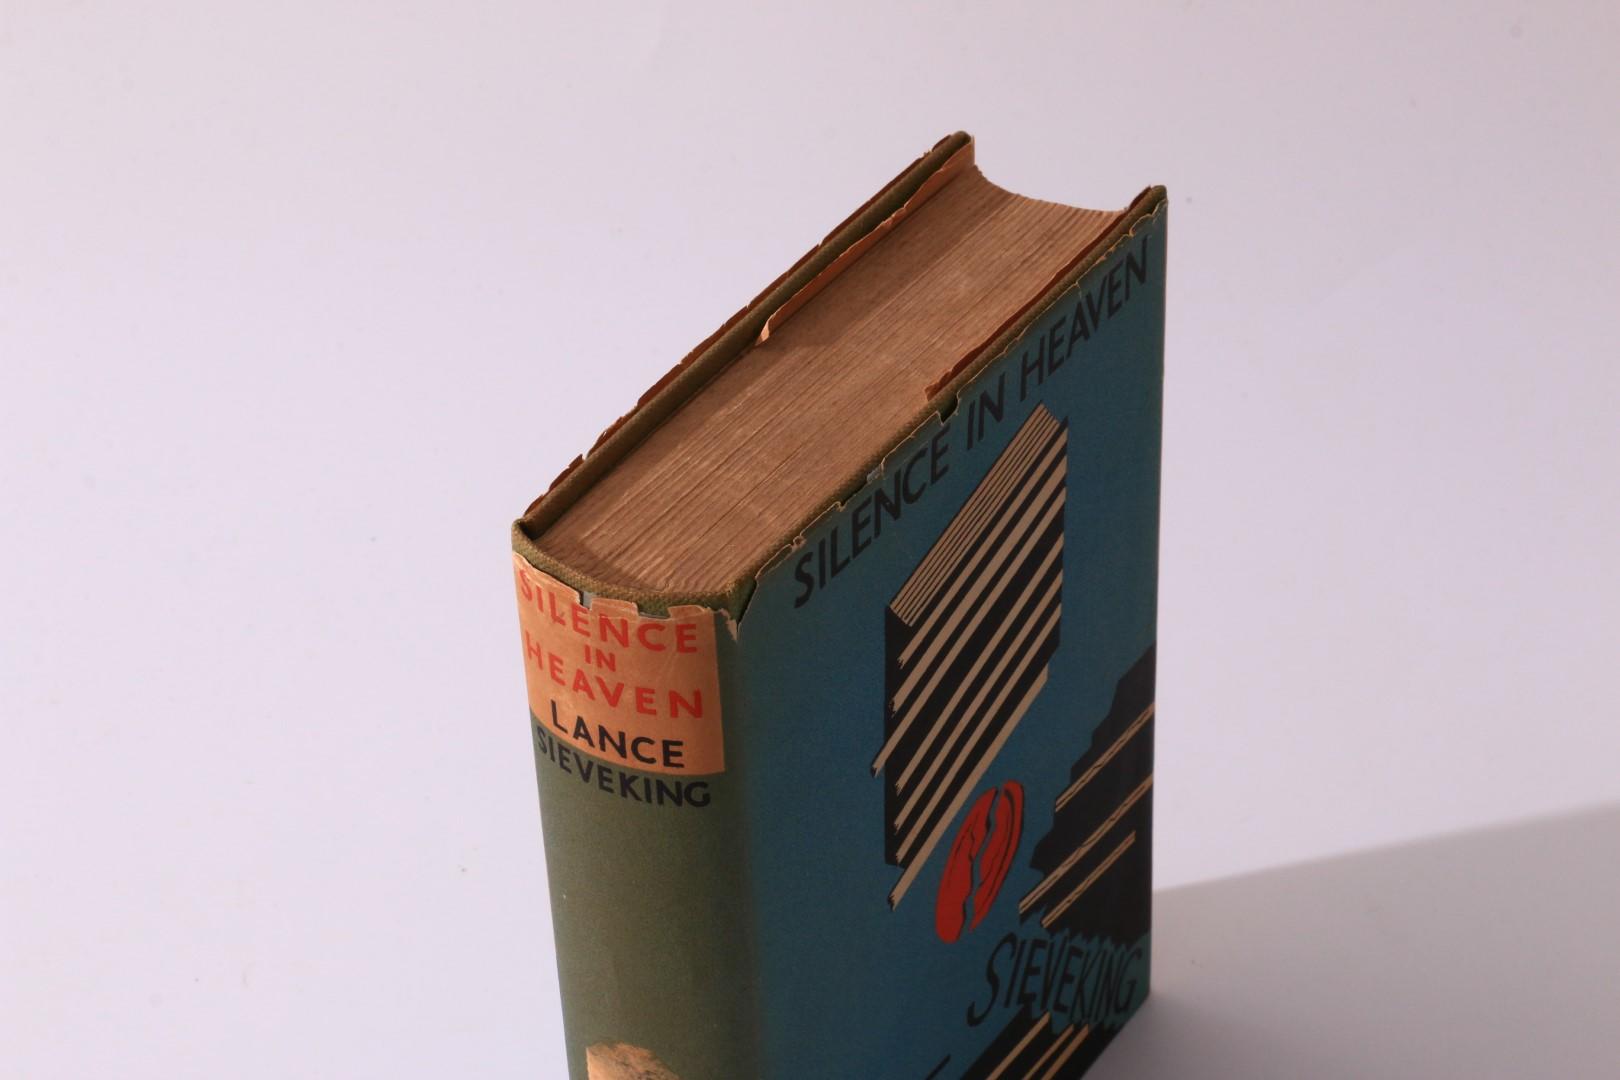 Lance Sieveking - Silence in Heaven - Cassell, 1936, Signed First Edition.